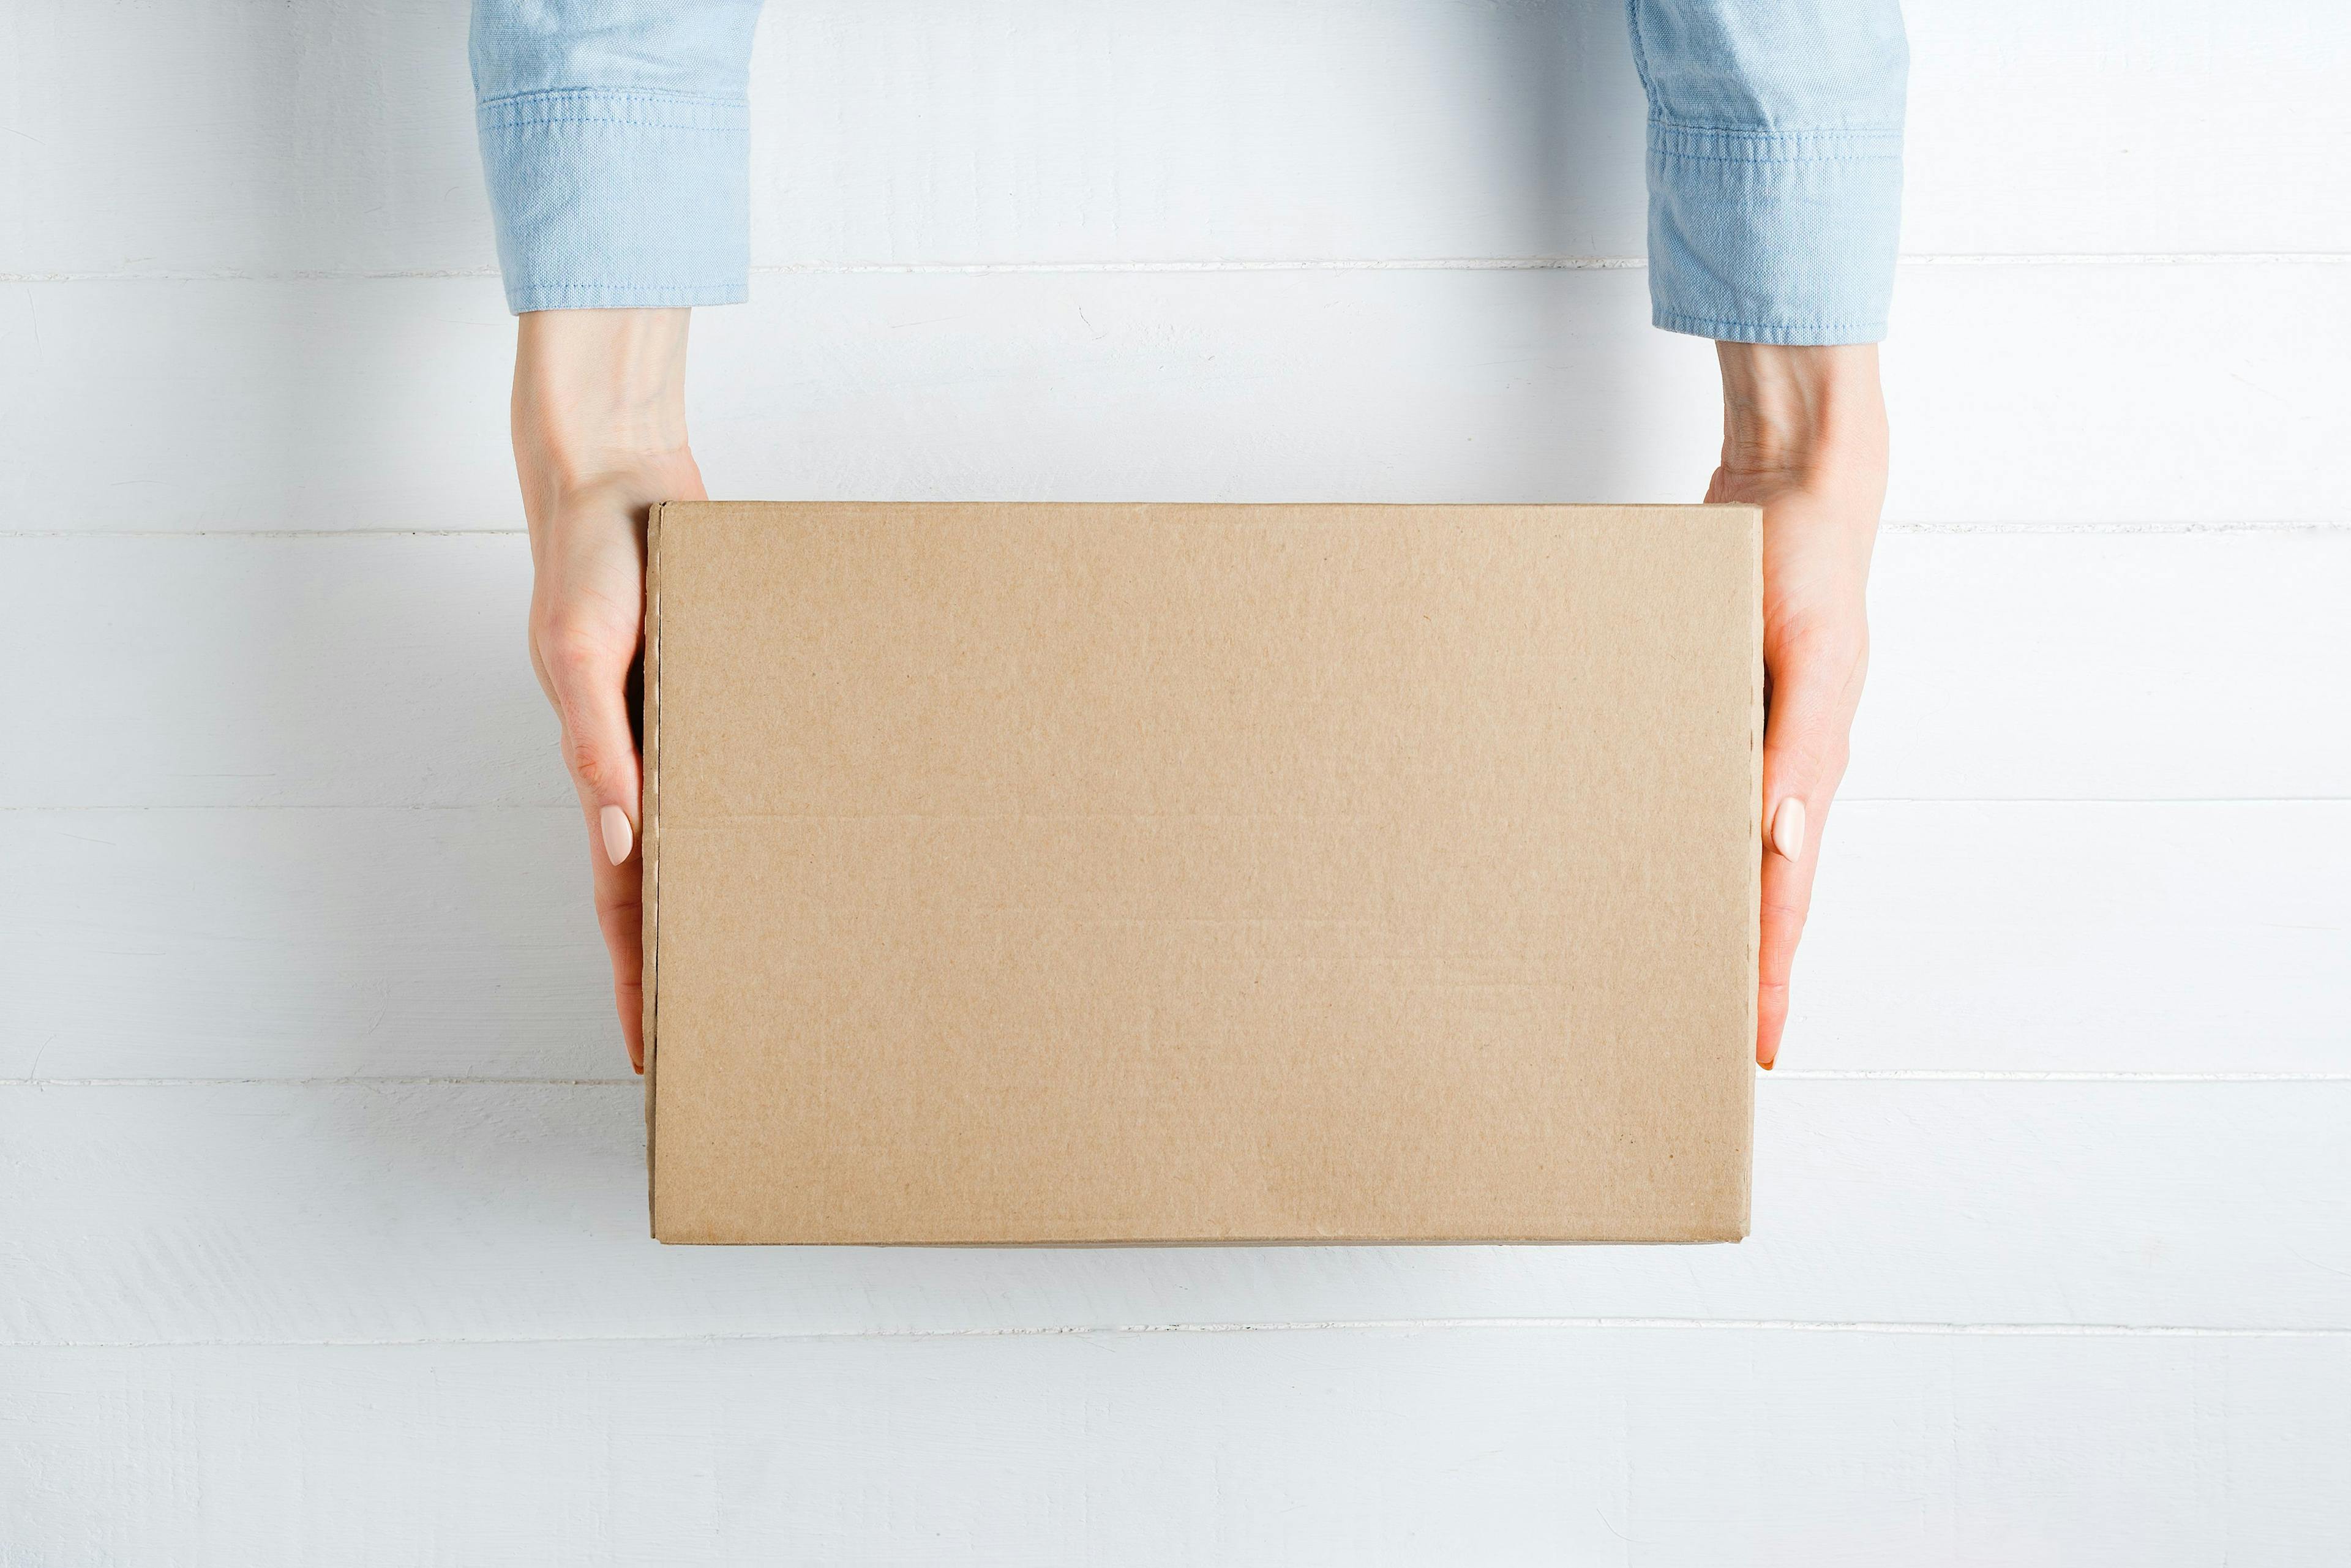 Rectangular cardboard box in female hands. Top view, white background | Image credit: © somemeans - © stock.adobe.com